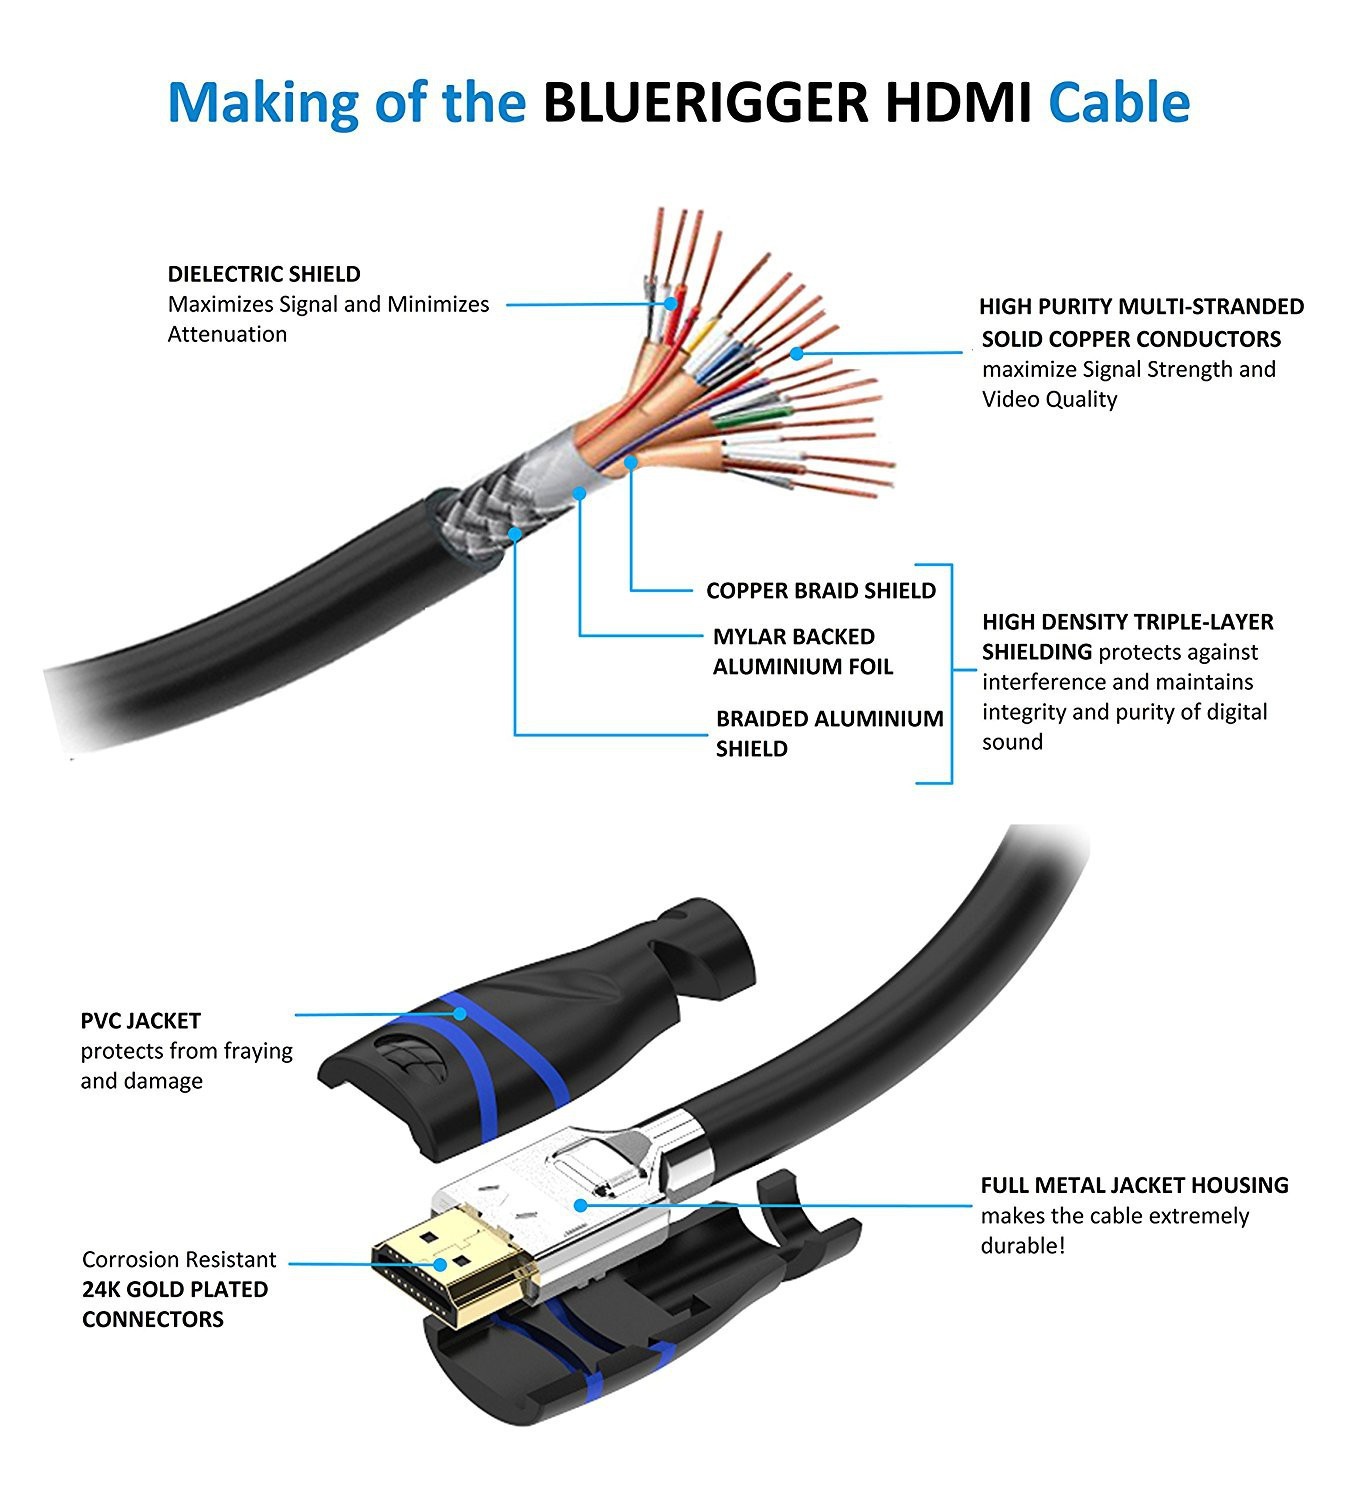 Wiring Diagram for Hdmi Cable Fresh Hdmi to Rca Cable Wiring Diagram New Hdmi Cable Wire